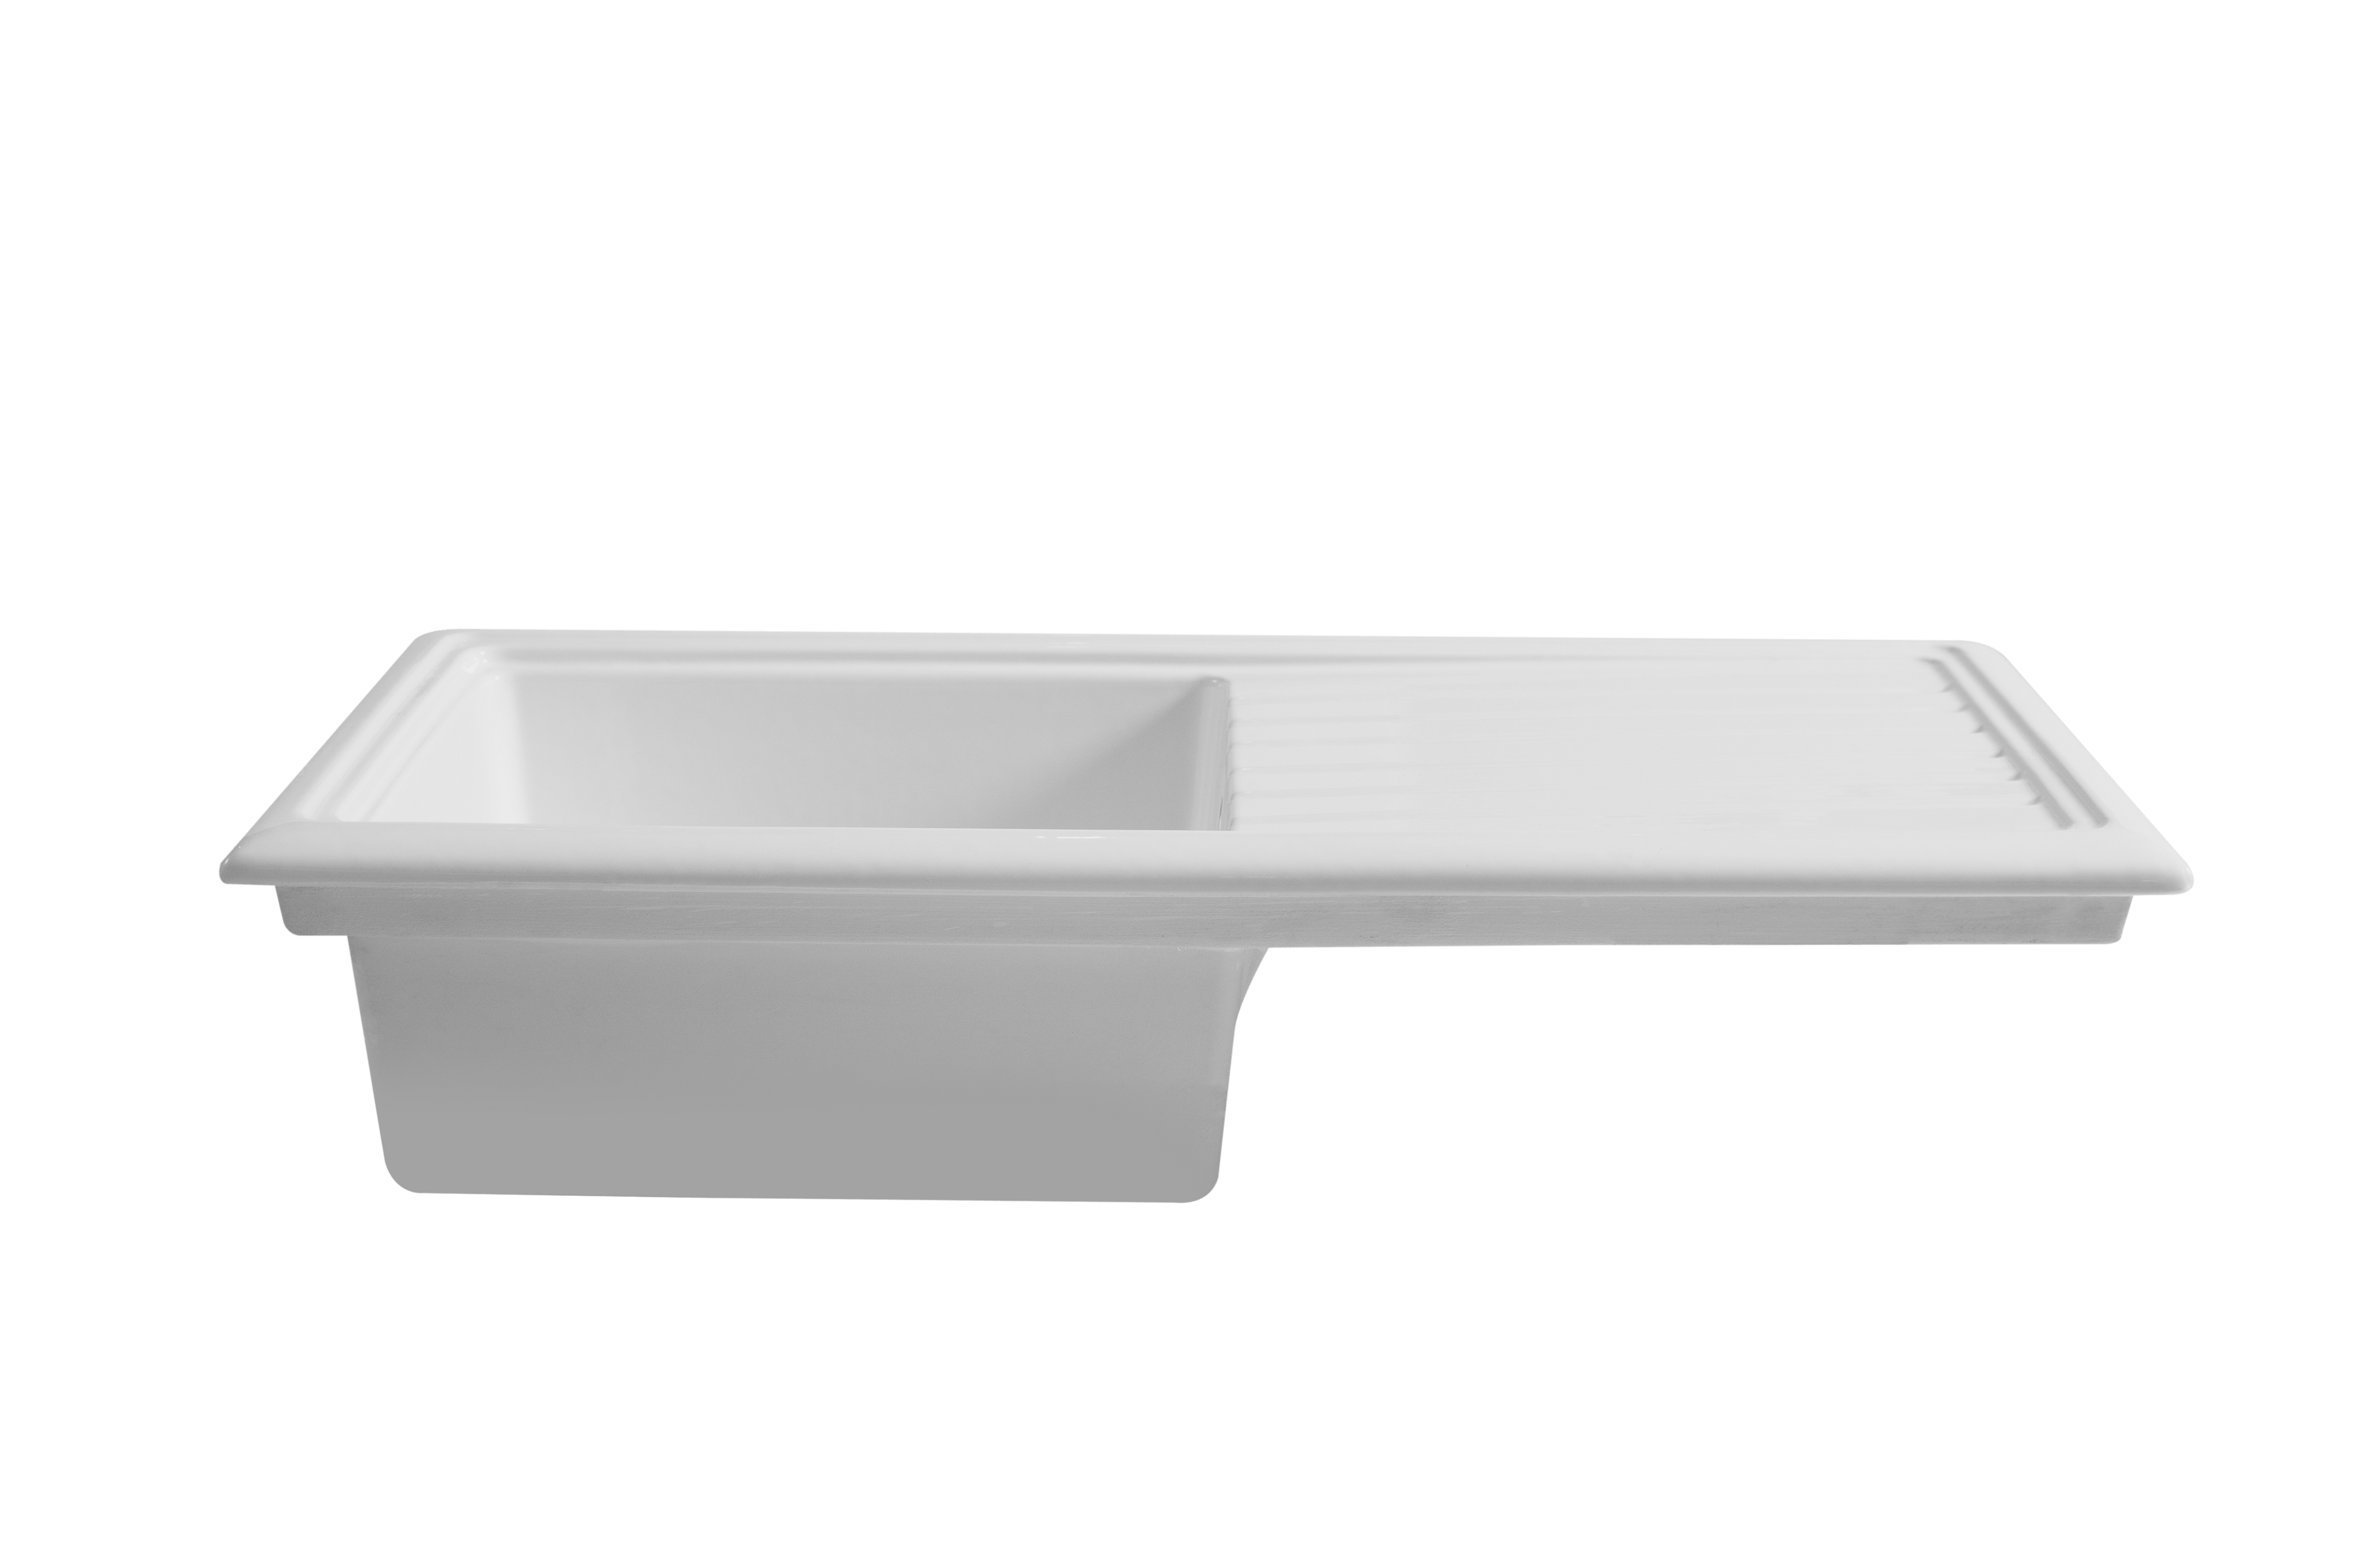 is there a 34 ceramic kitchen sink